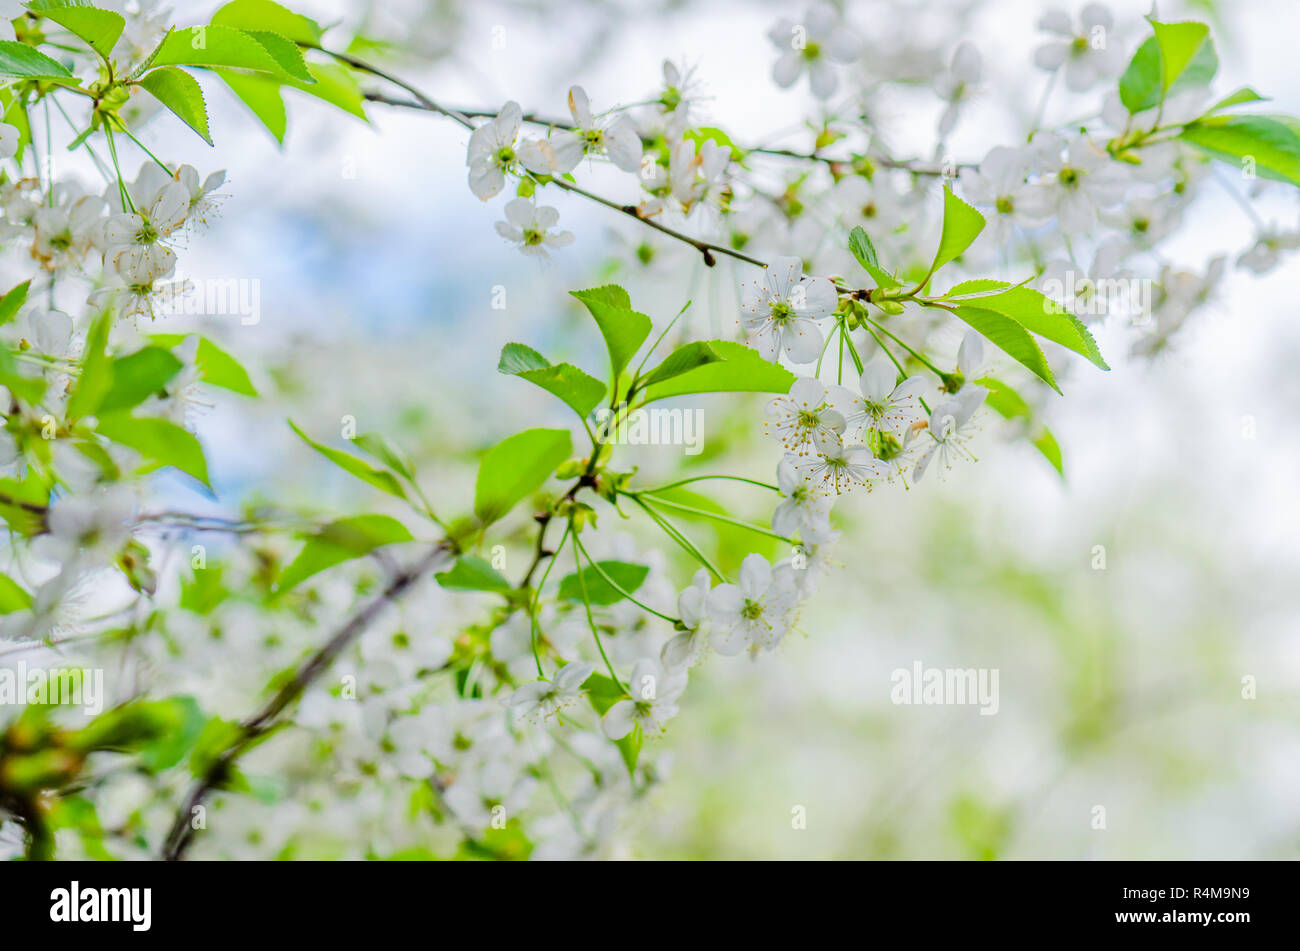 A branch of cherry blossoms in the springtime, close-up Stock Photo